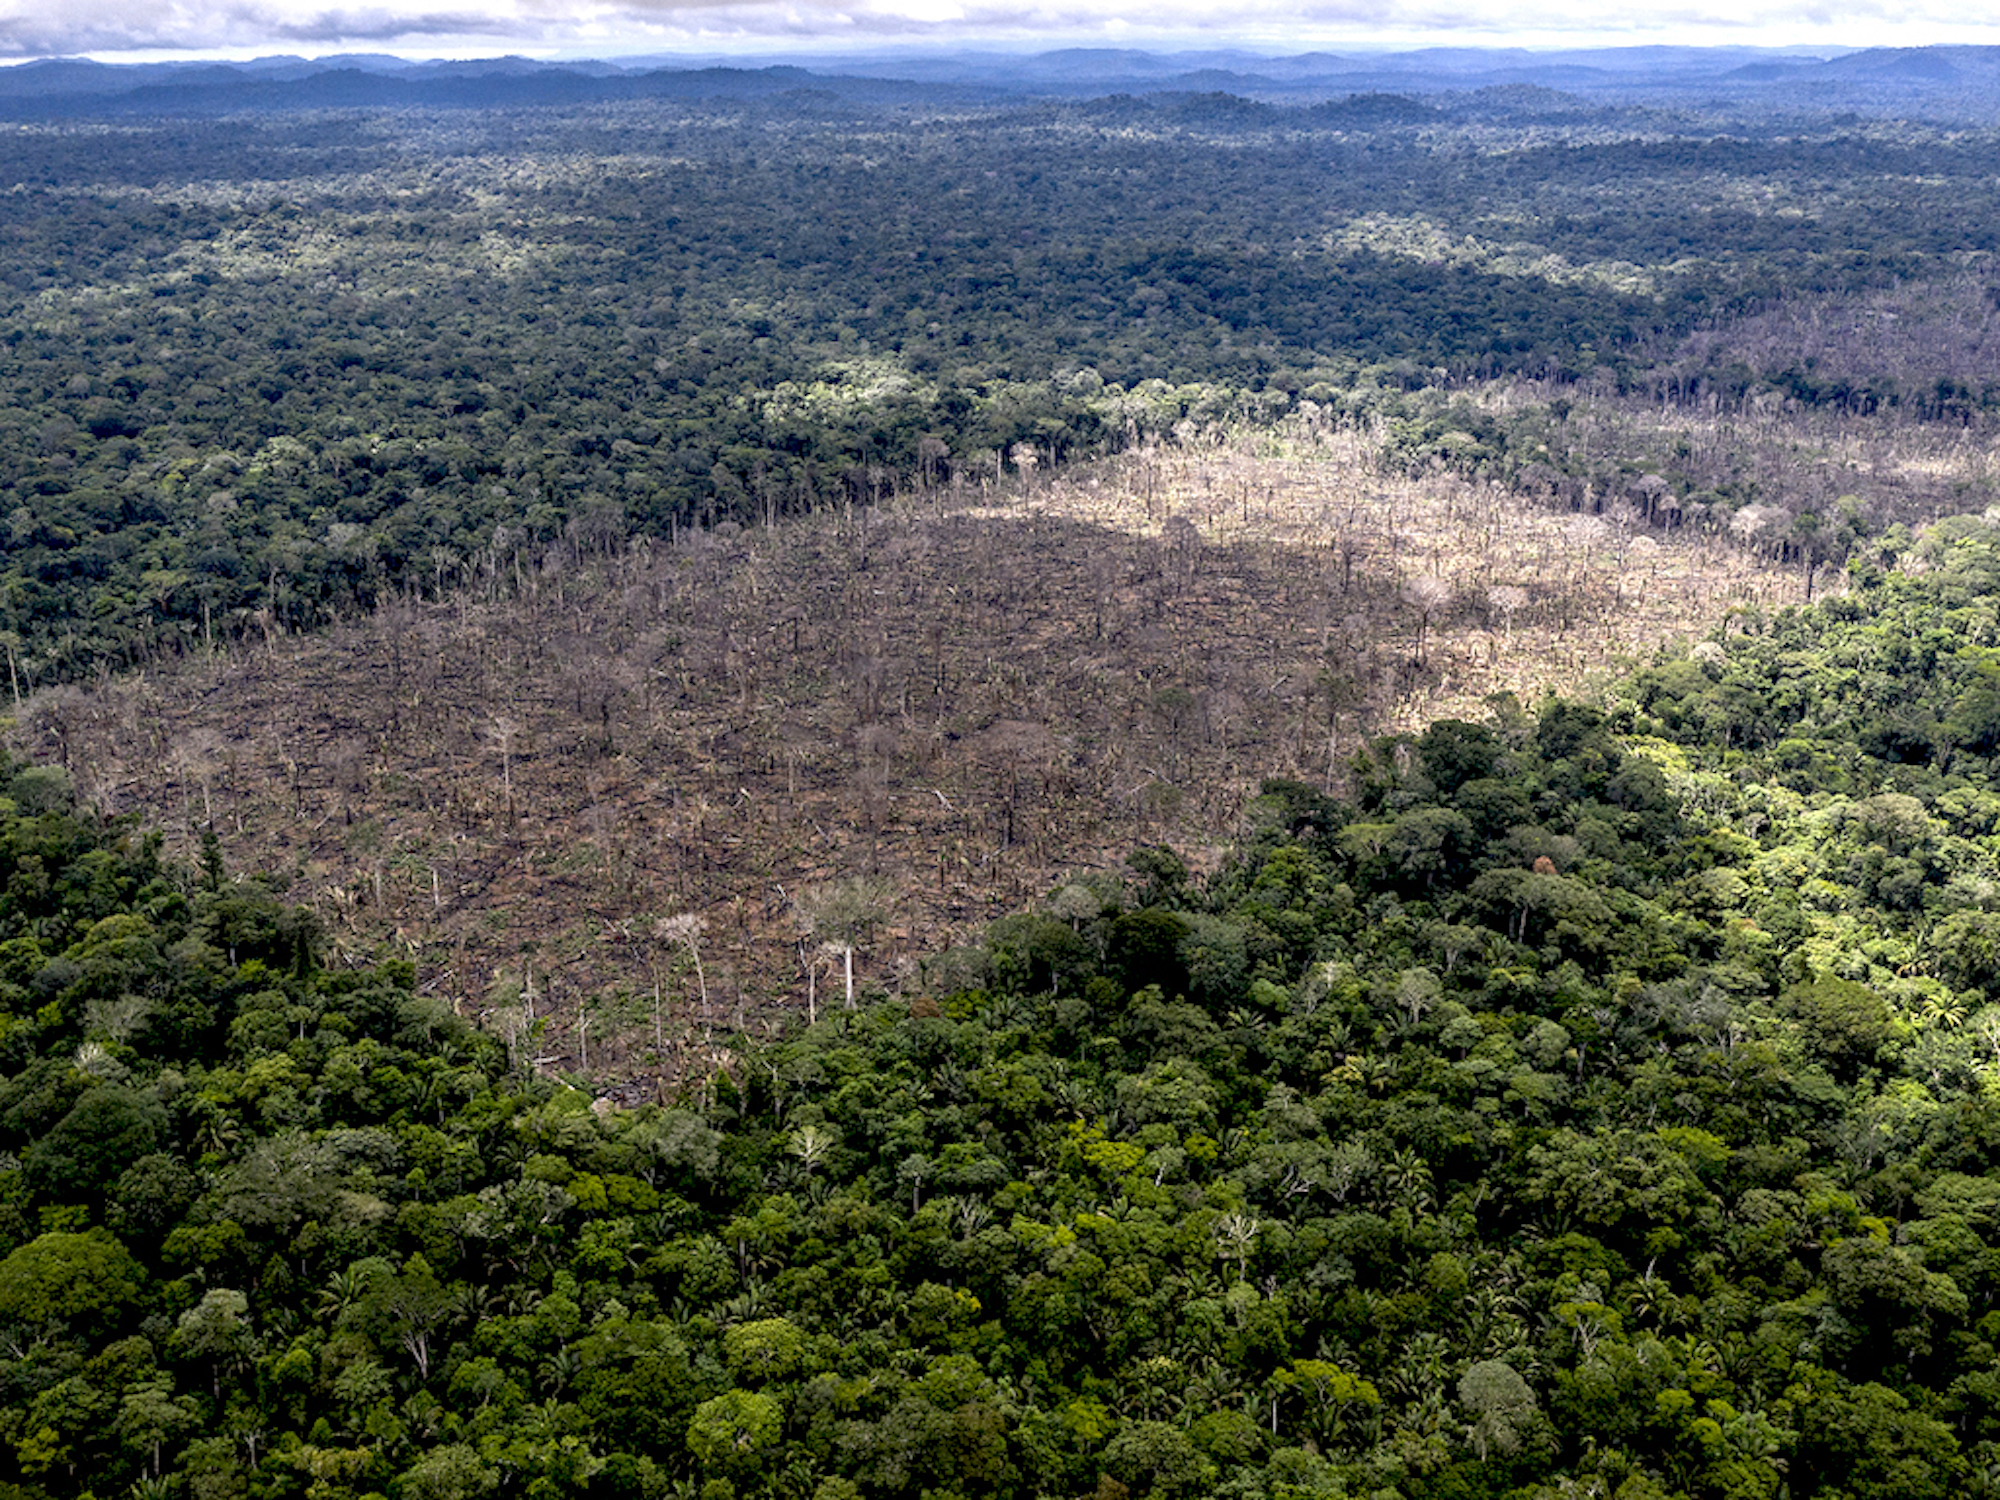 Deforestation in Brazil is down by more than a third so far this year